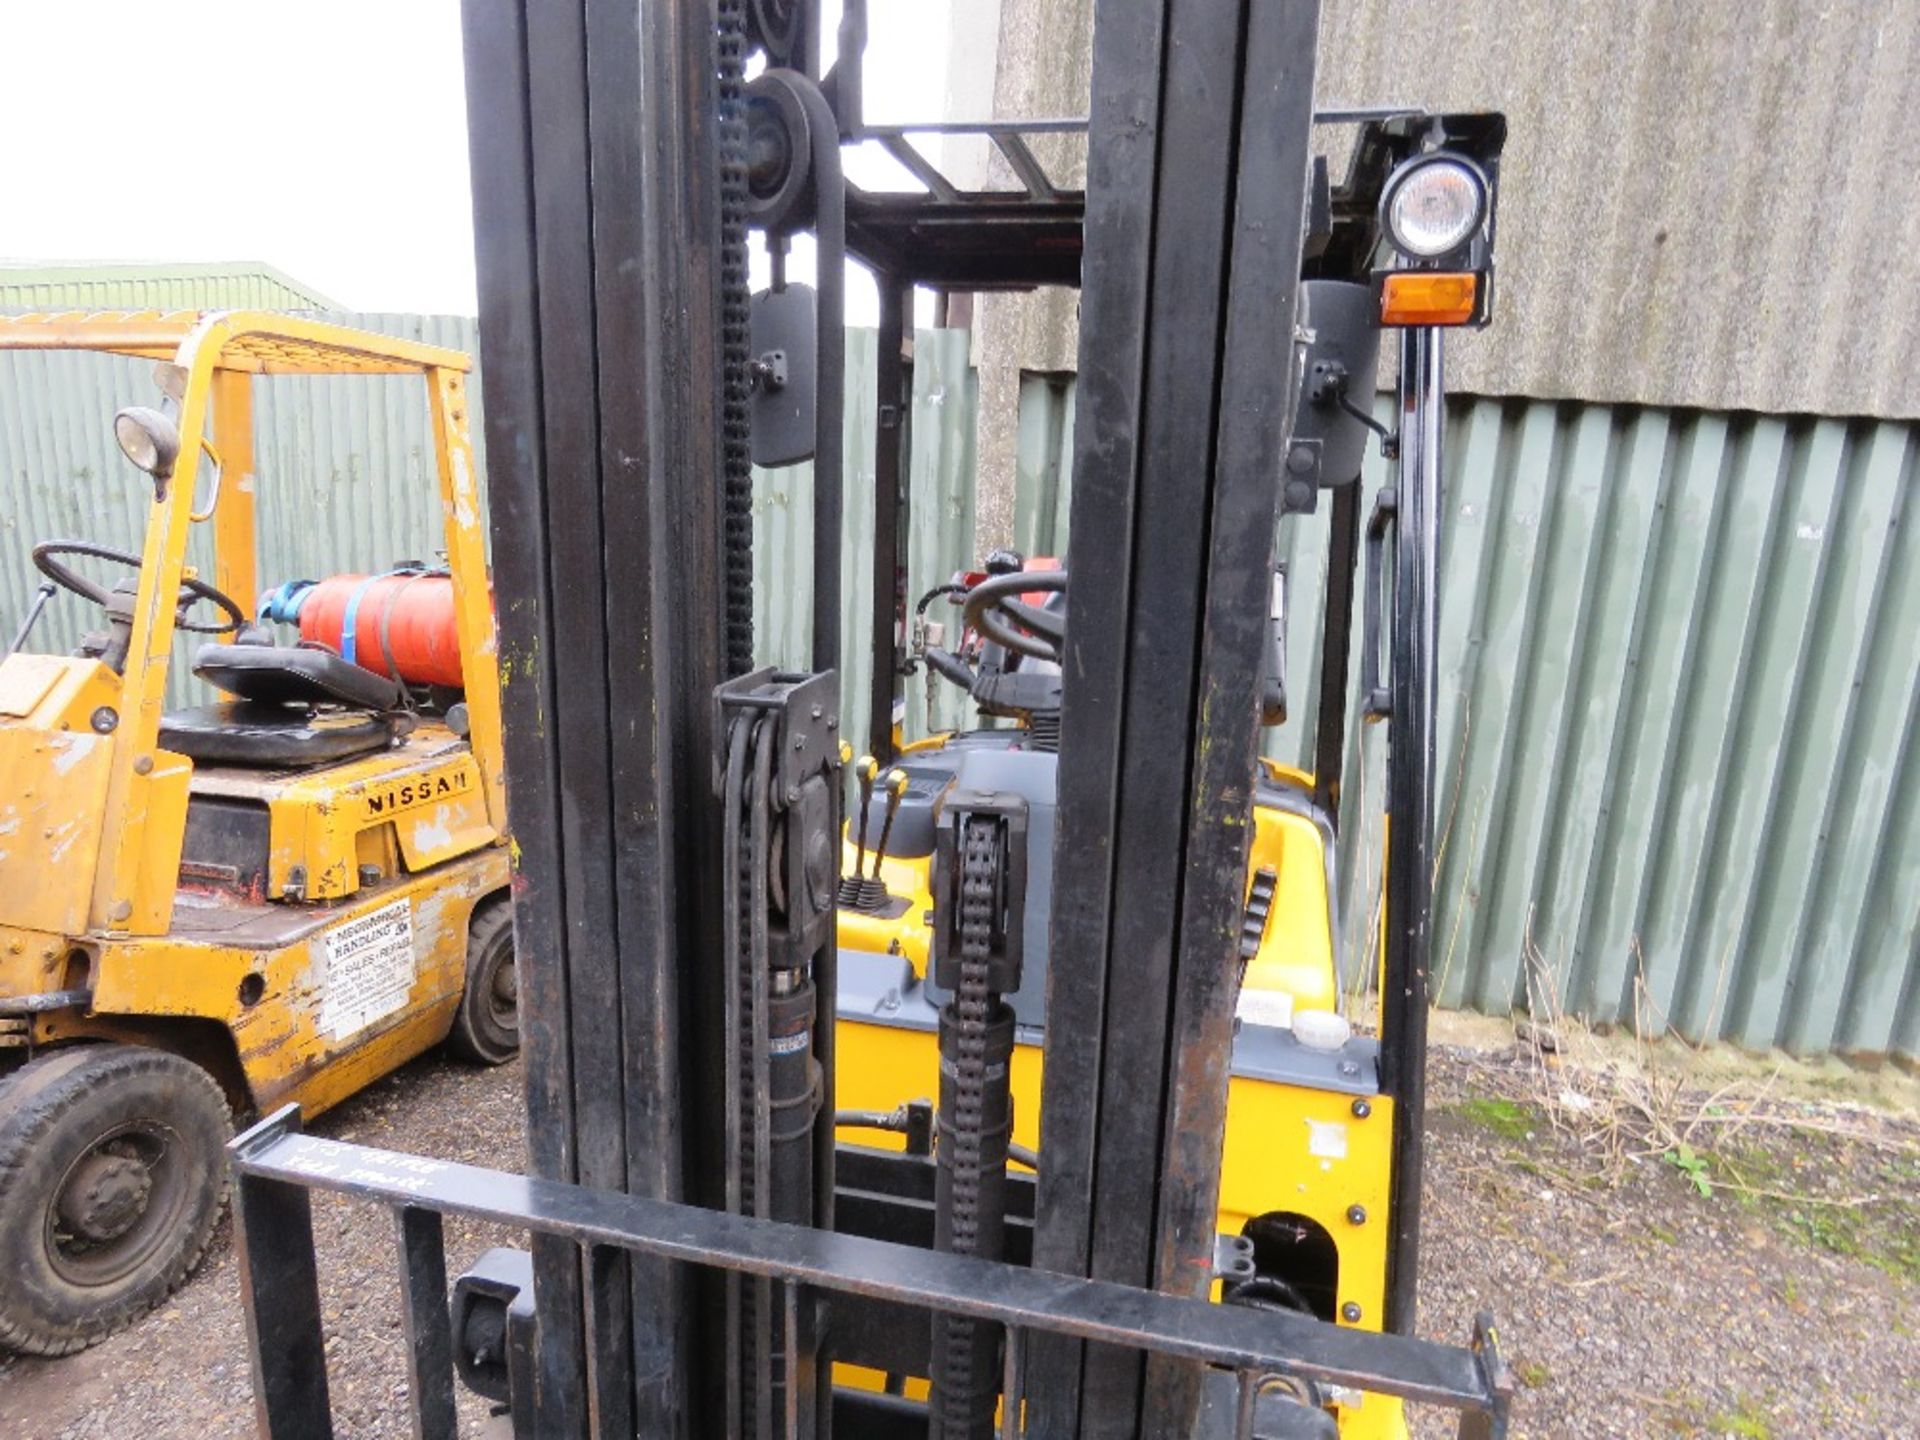 HYUNDAI 20L-7M GAS POWERED 2 TONNE FORKLIFT TRUCK. YEAR 2018 BUILD, LITTLE USED RECENTLY. - Image 3 of 12